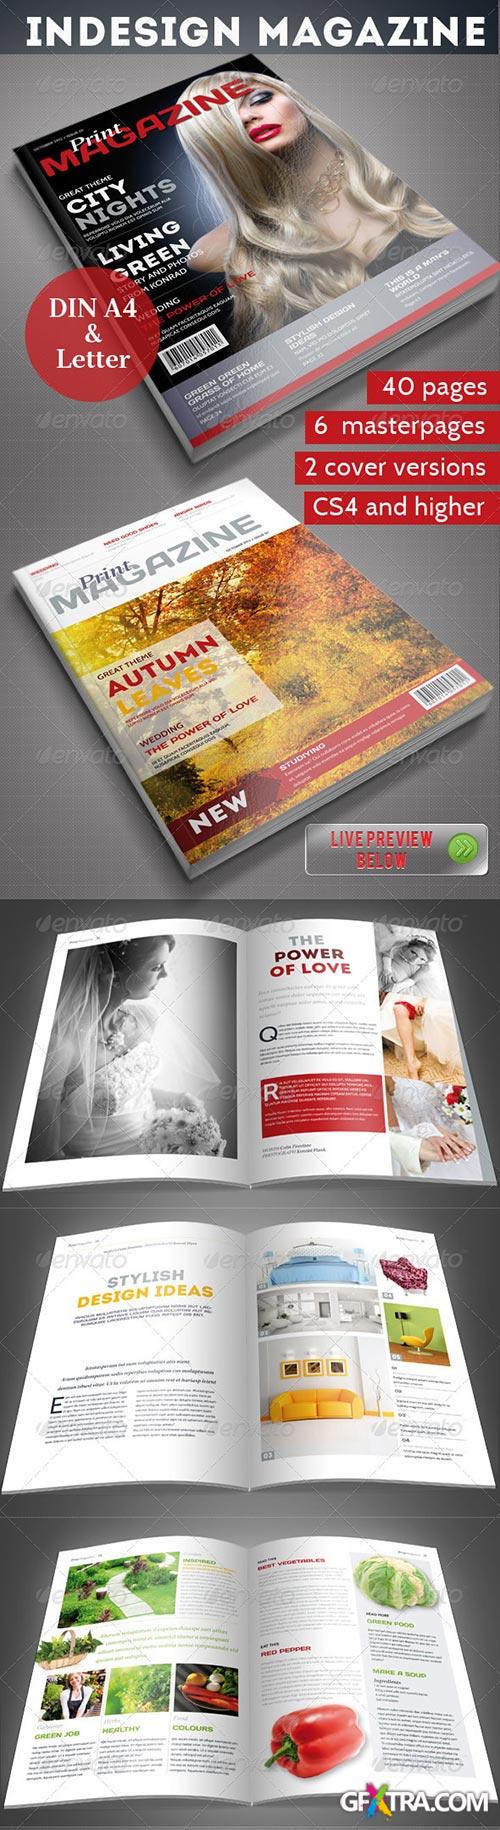 GraphicRiver - InDesign Magazine Template 40 pages